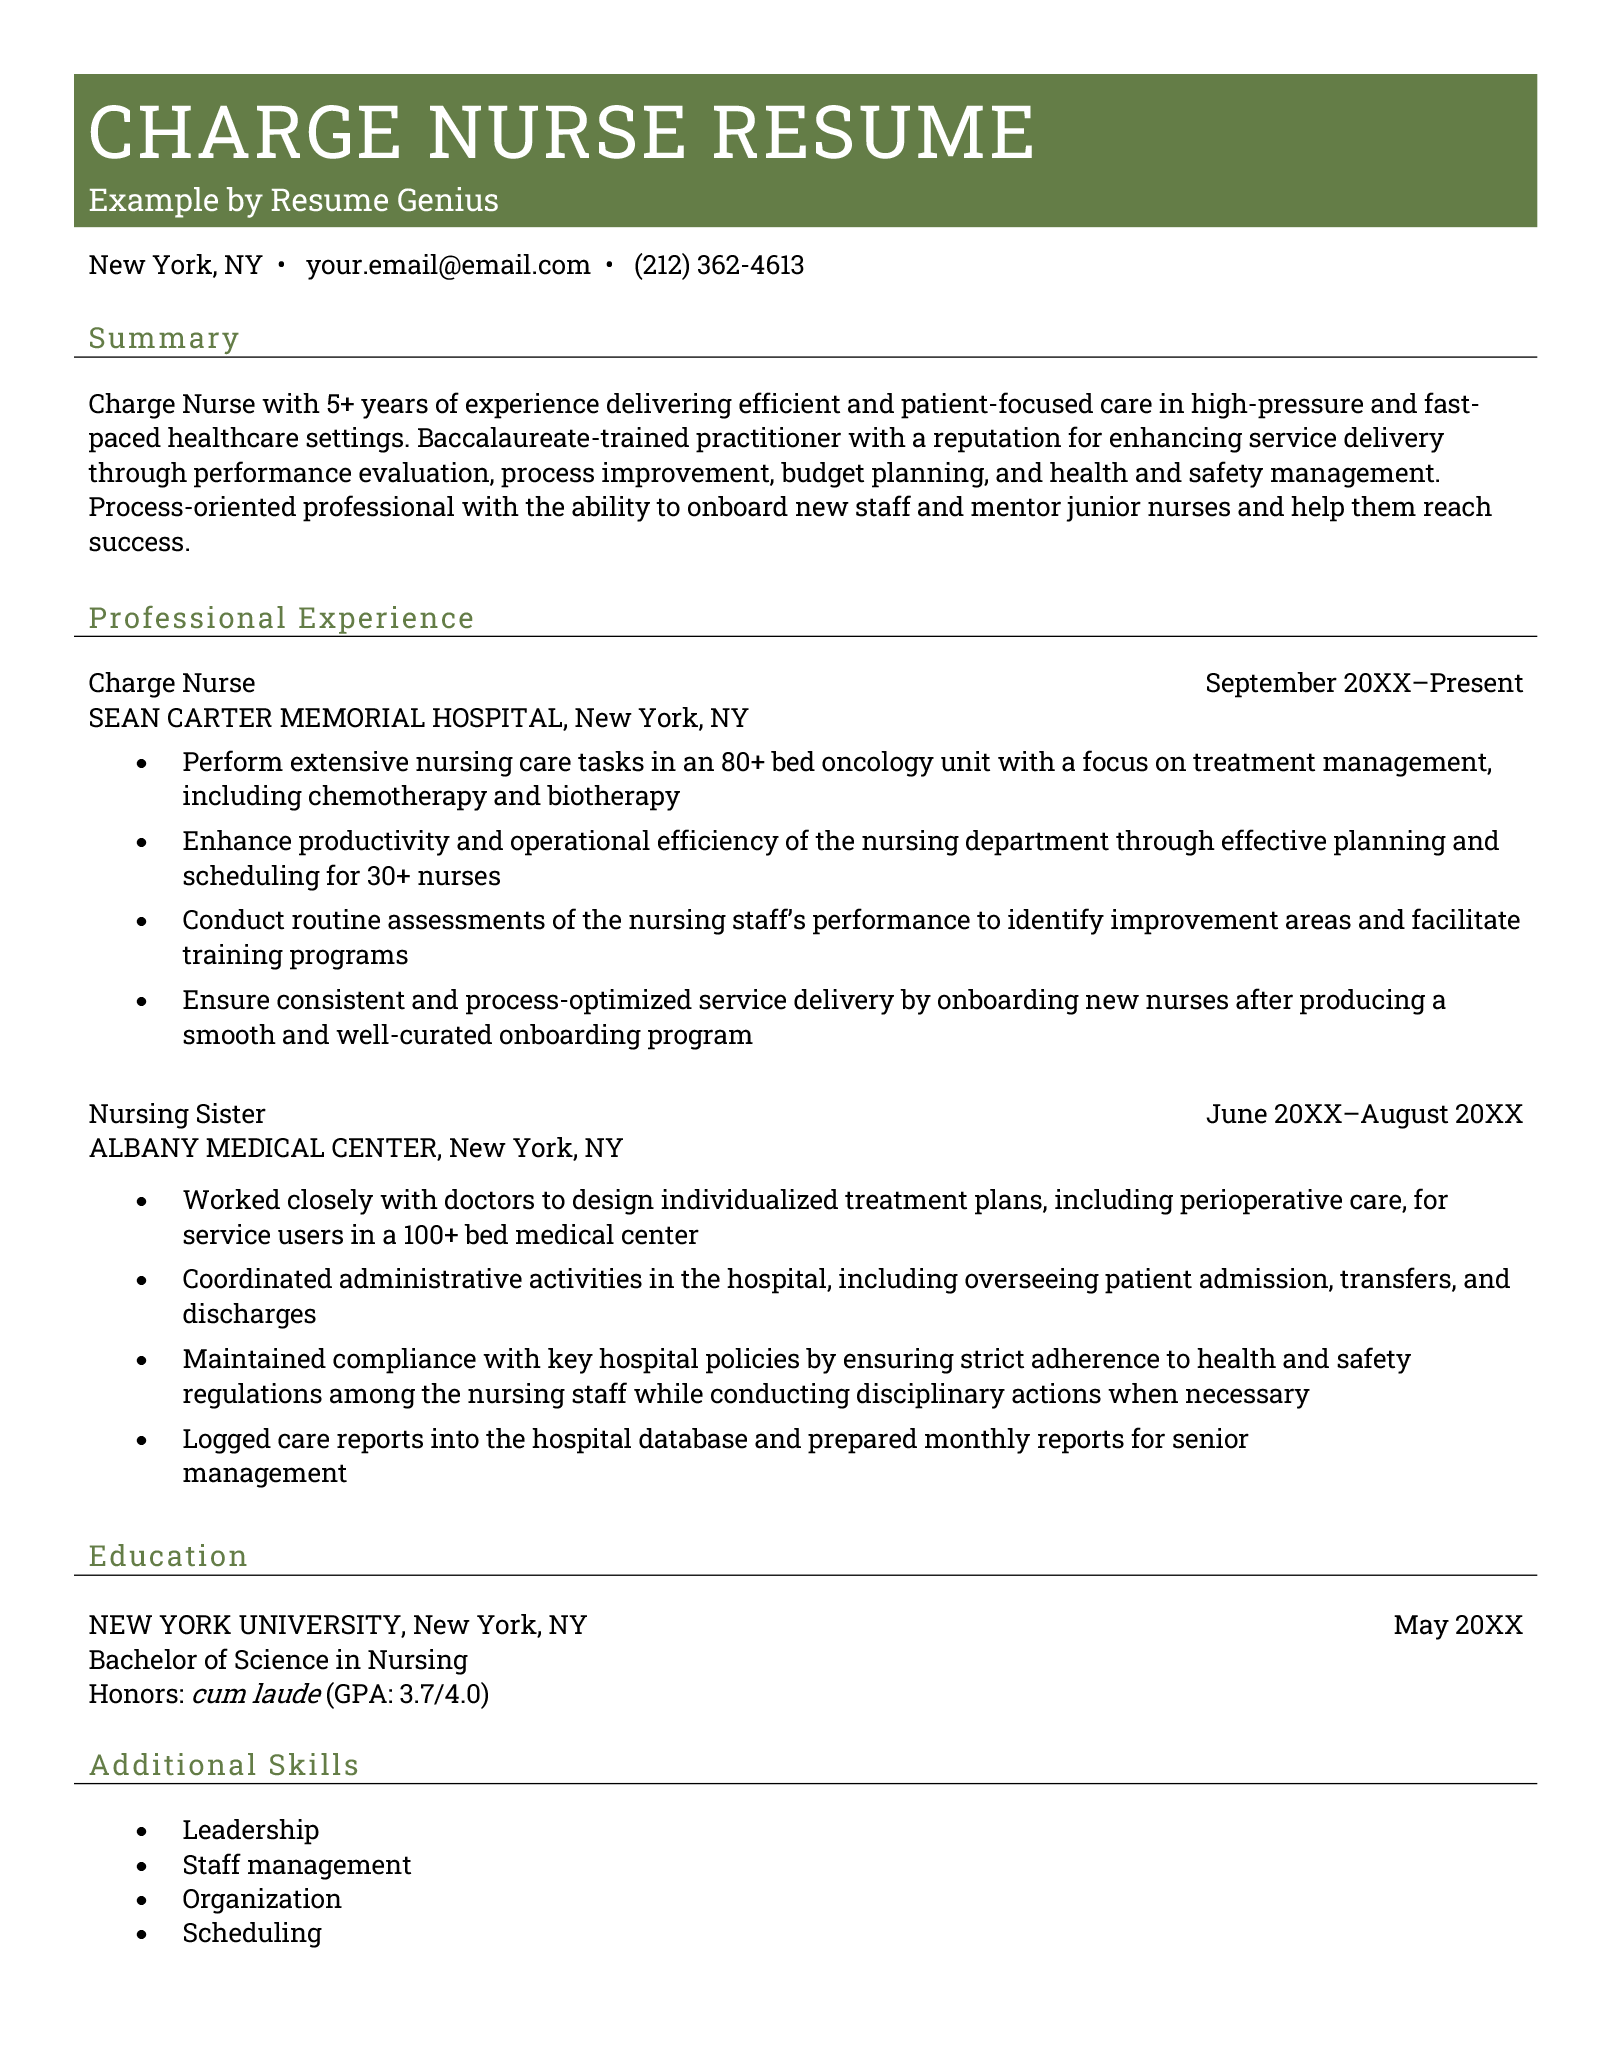 A charge nurse resume example on a template with a wide green header and the summary, professional experience, education, and additional skills sections highlighted in green